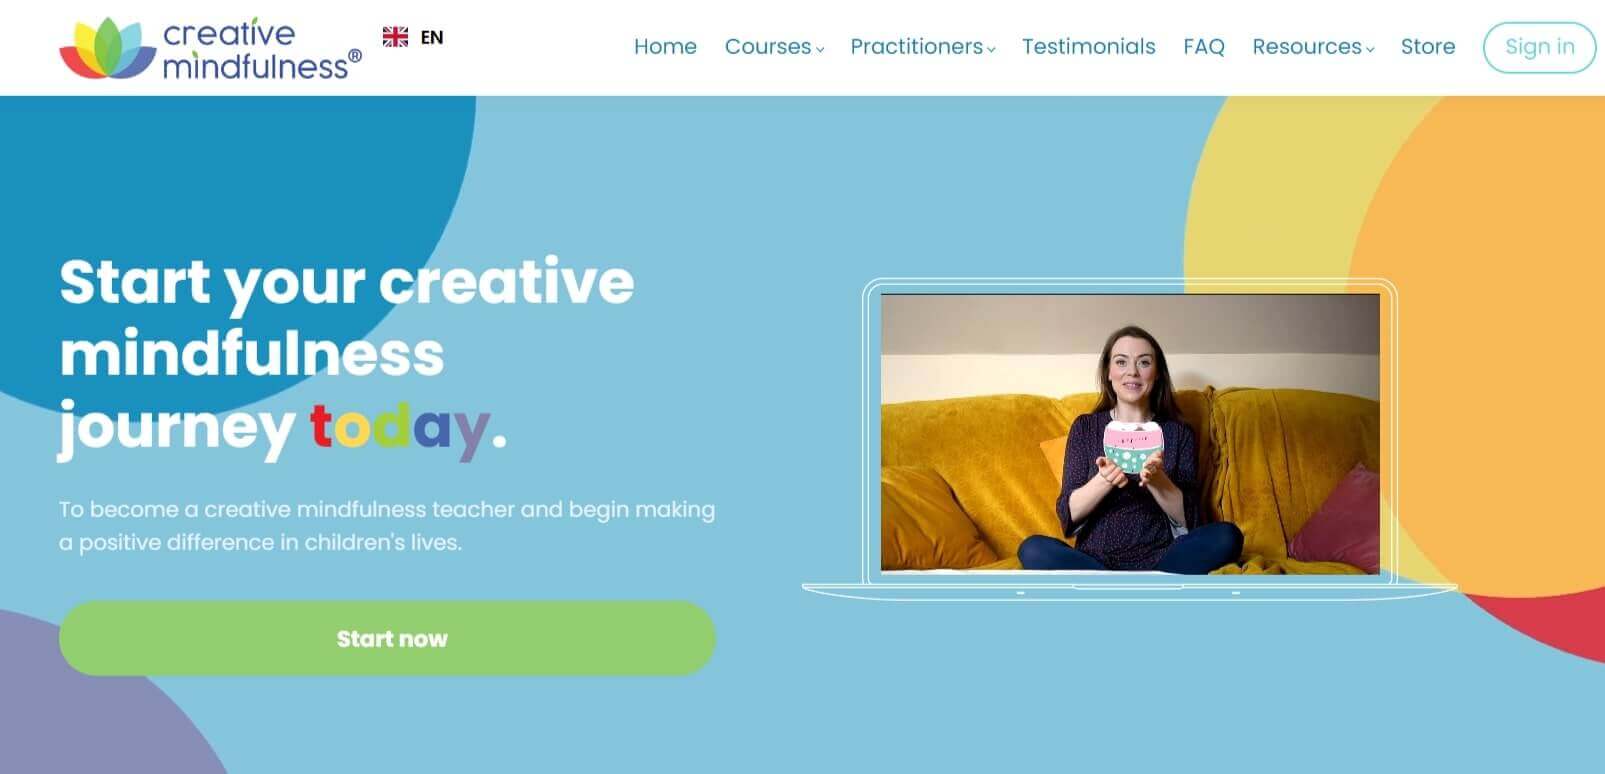 A screenshot of Louise Shanagher's online academy website offering online courses on creative mindfulness.